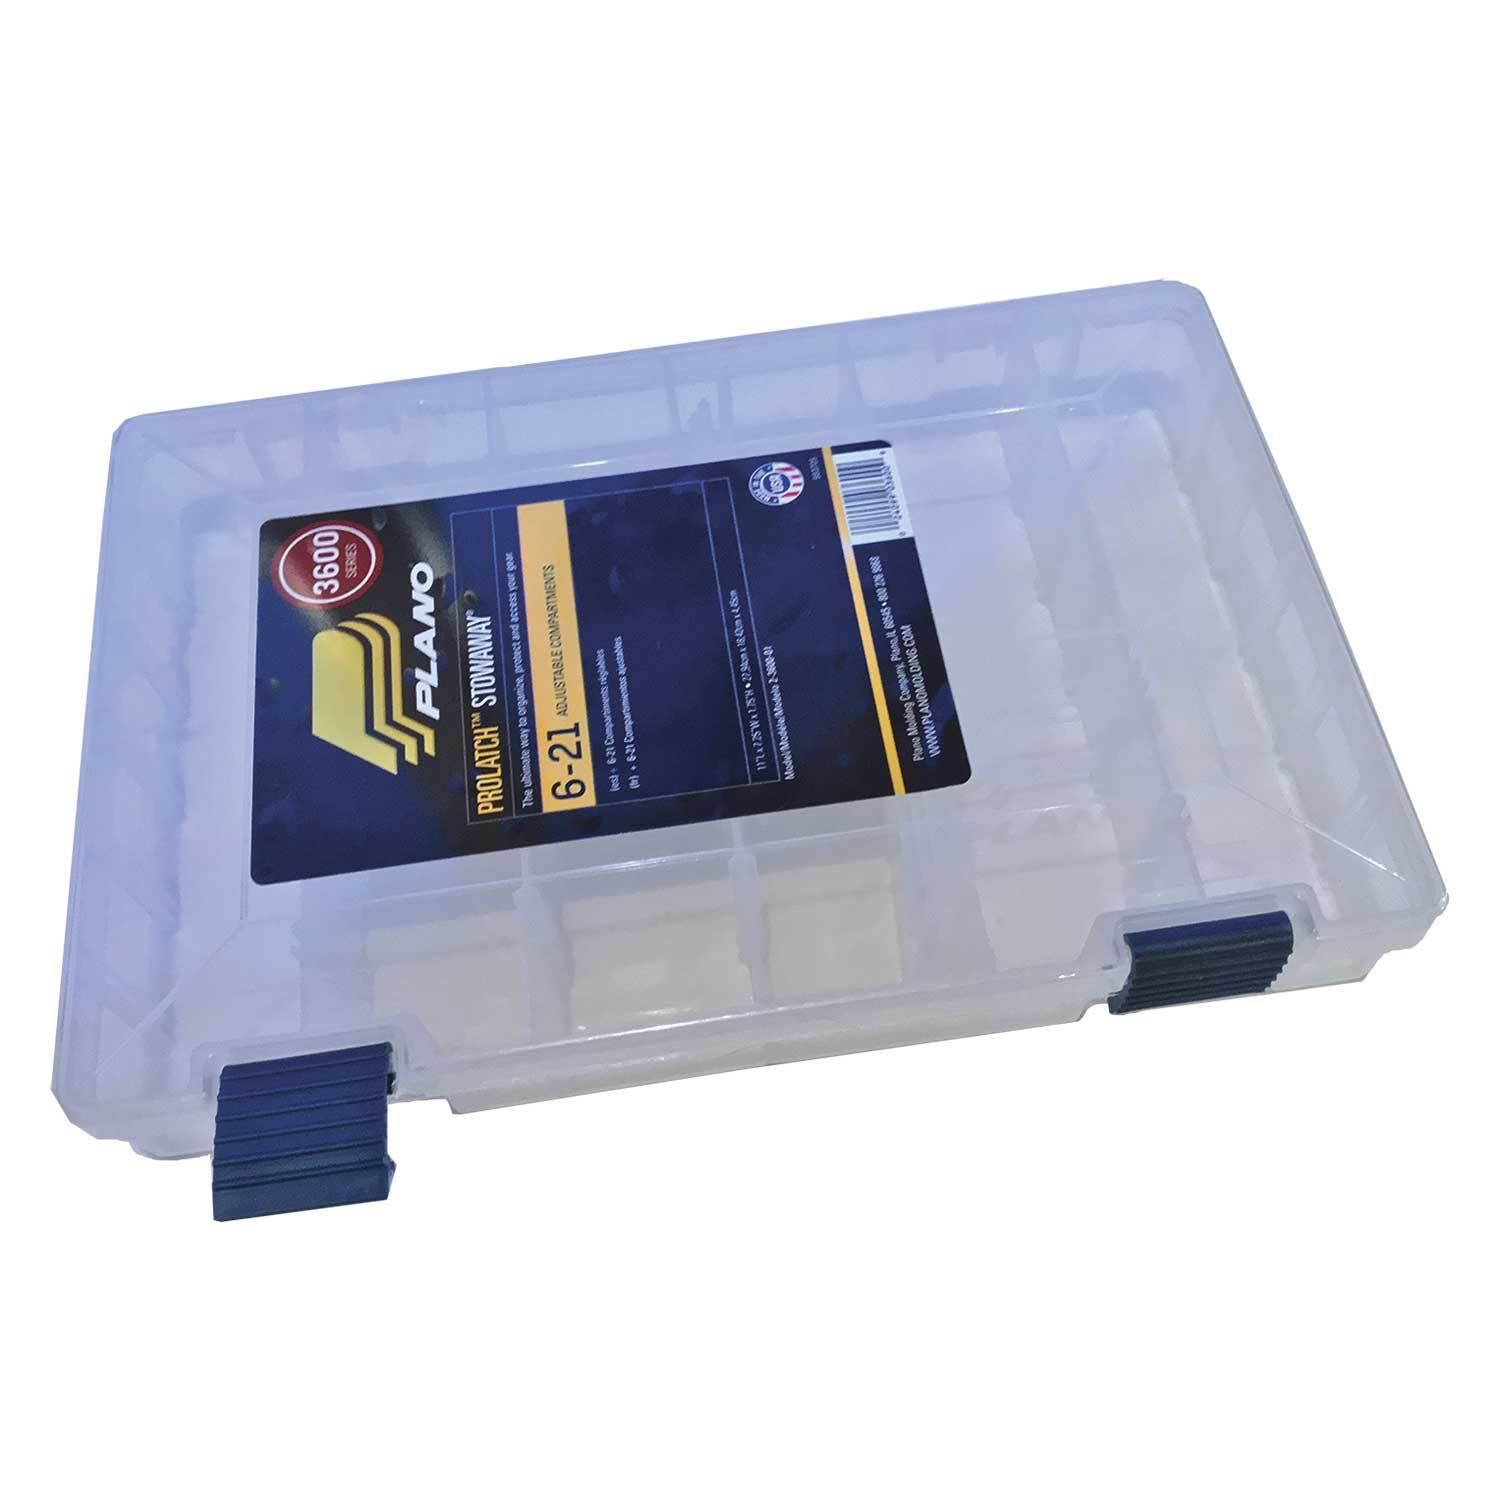 Plano Tackle Boxes